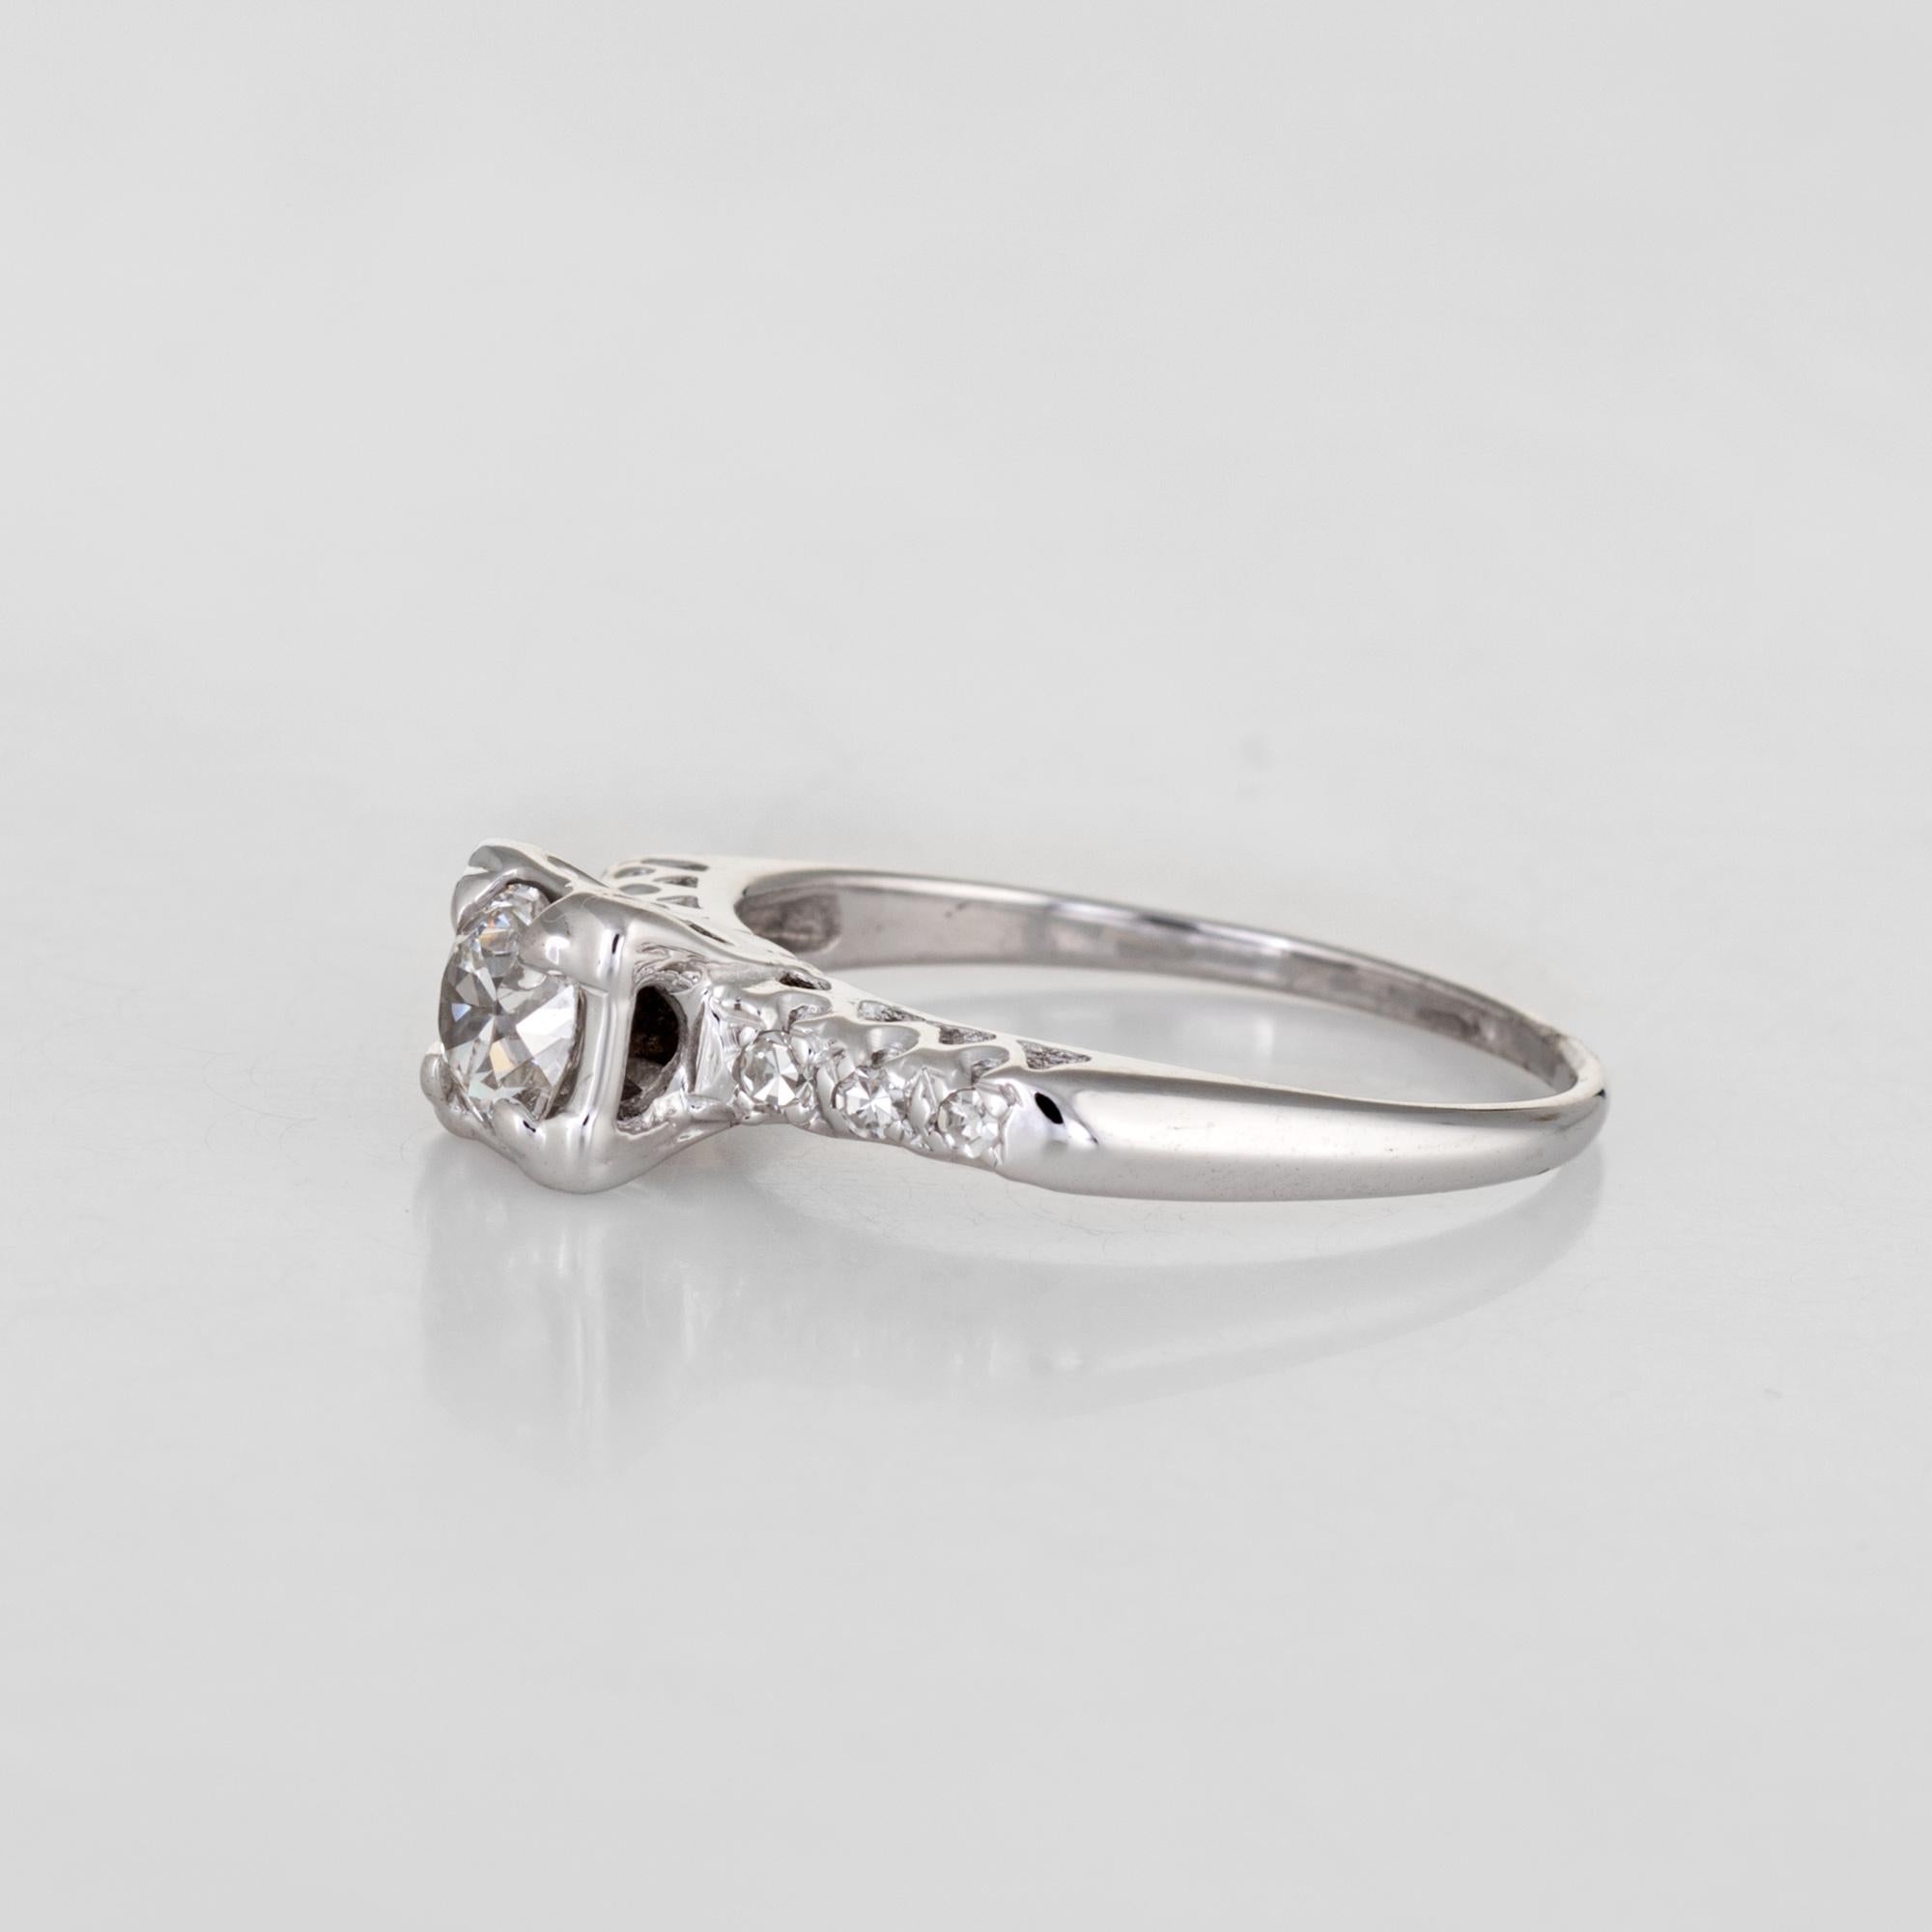 Vintage Diamond Engagement Ring 1/2 Carat Old European Cut Estate Fine In Excellent Condition For Sale In Torrance, CA